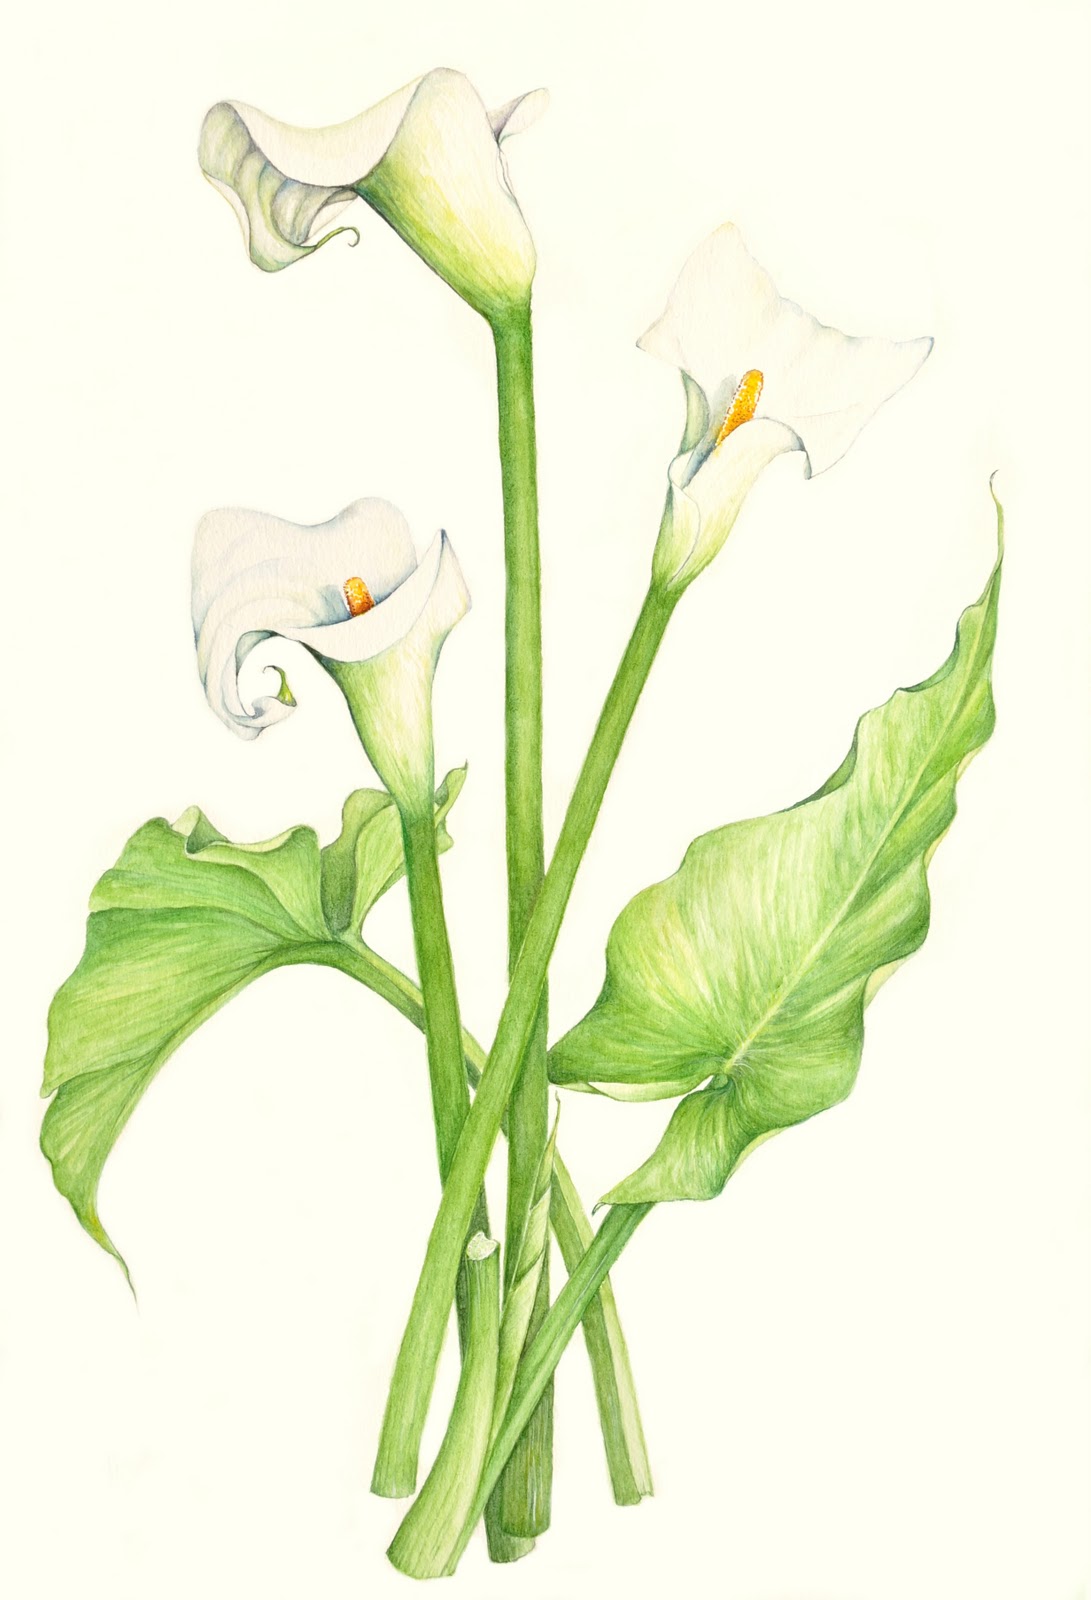 Simple Calla Lily Drawing at GetDrawings | Free download